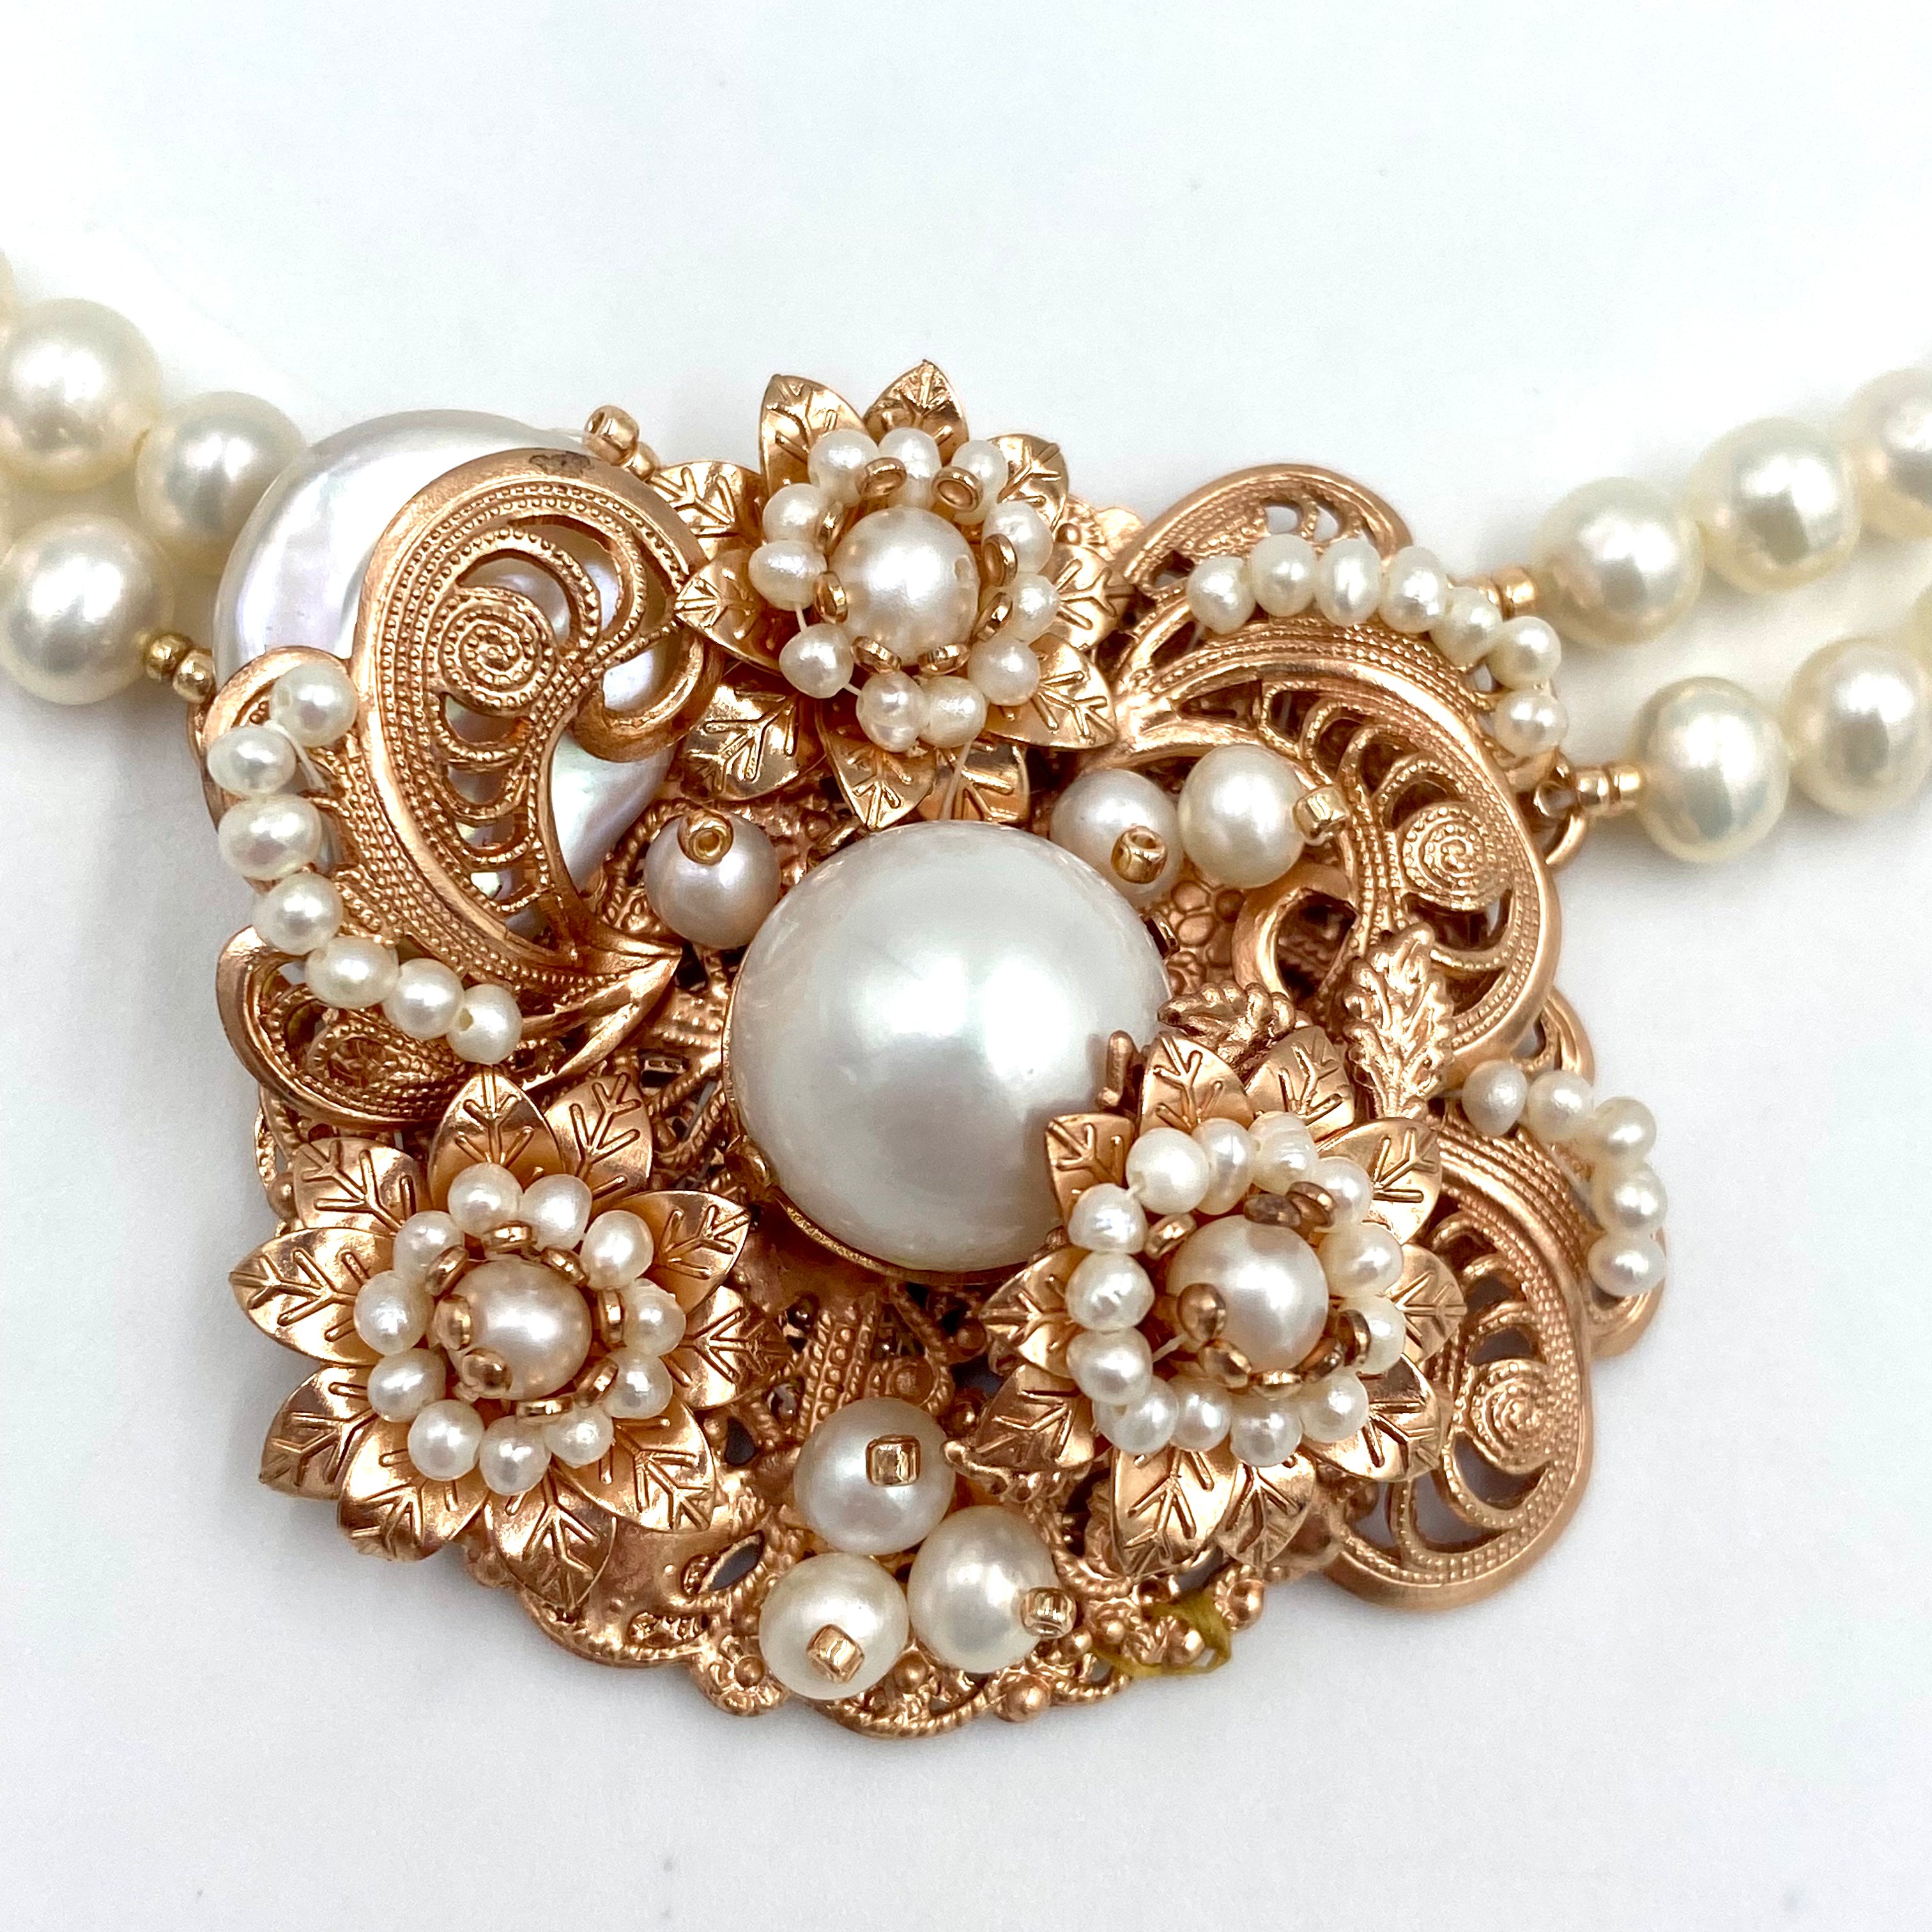 Vintage rose gold fresh water pearls stunning necklace